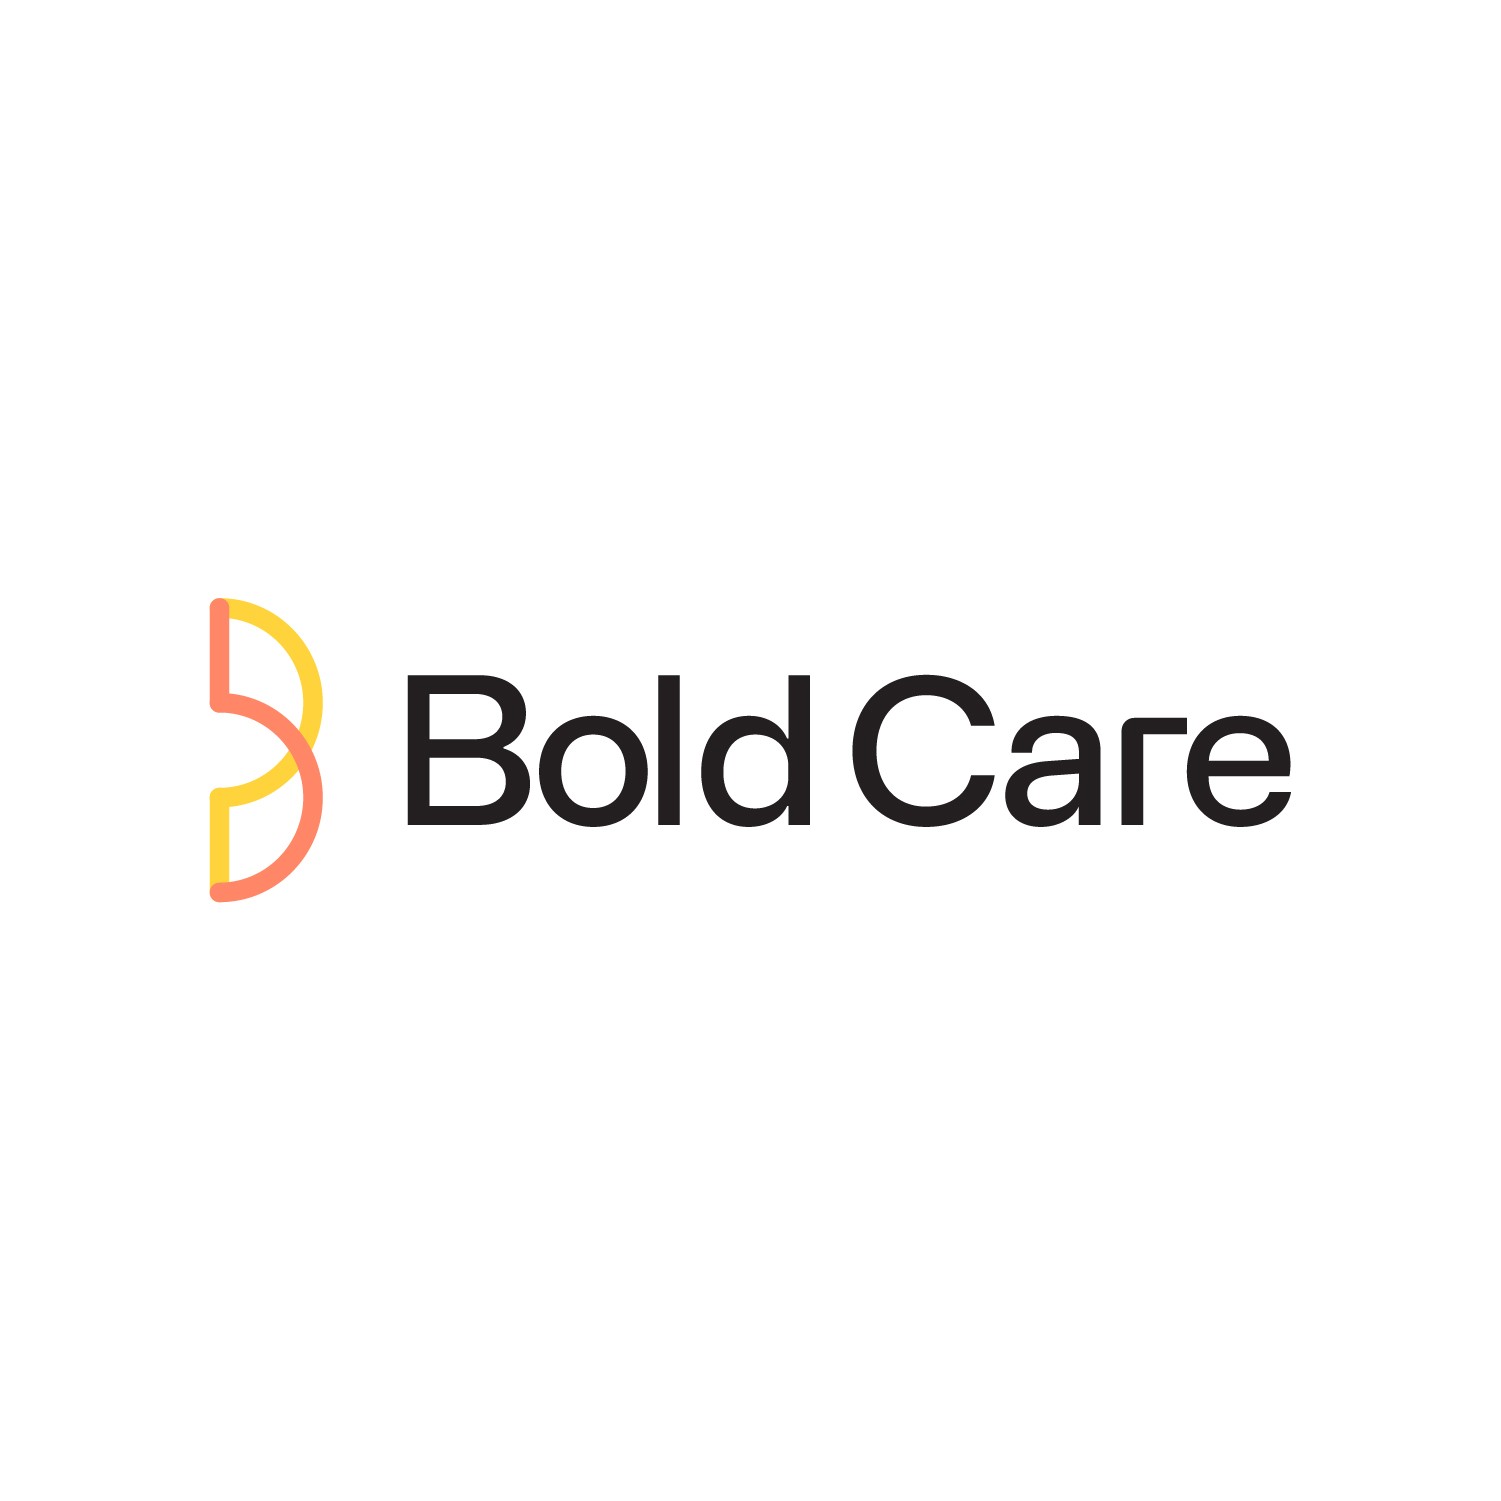 Bold Care Coupons